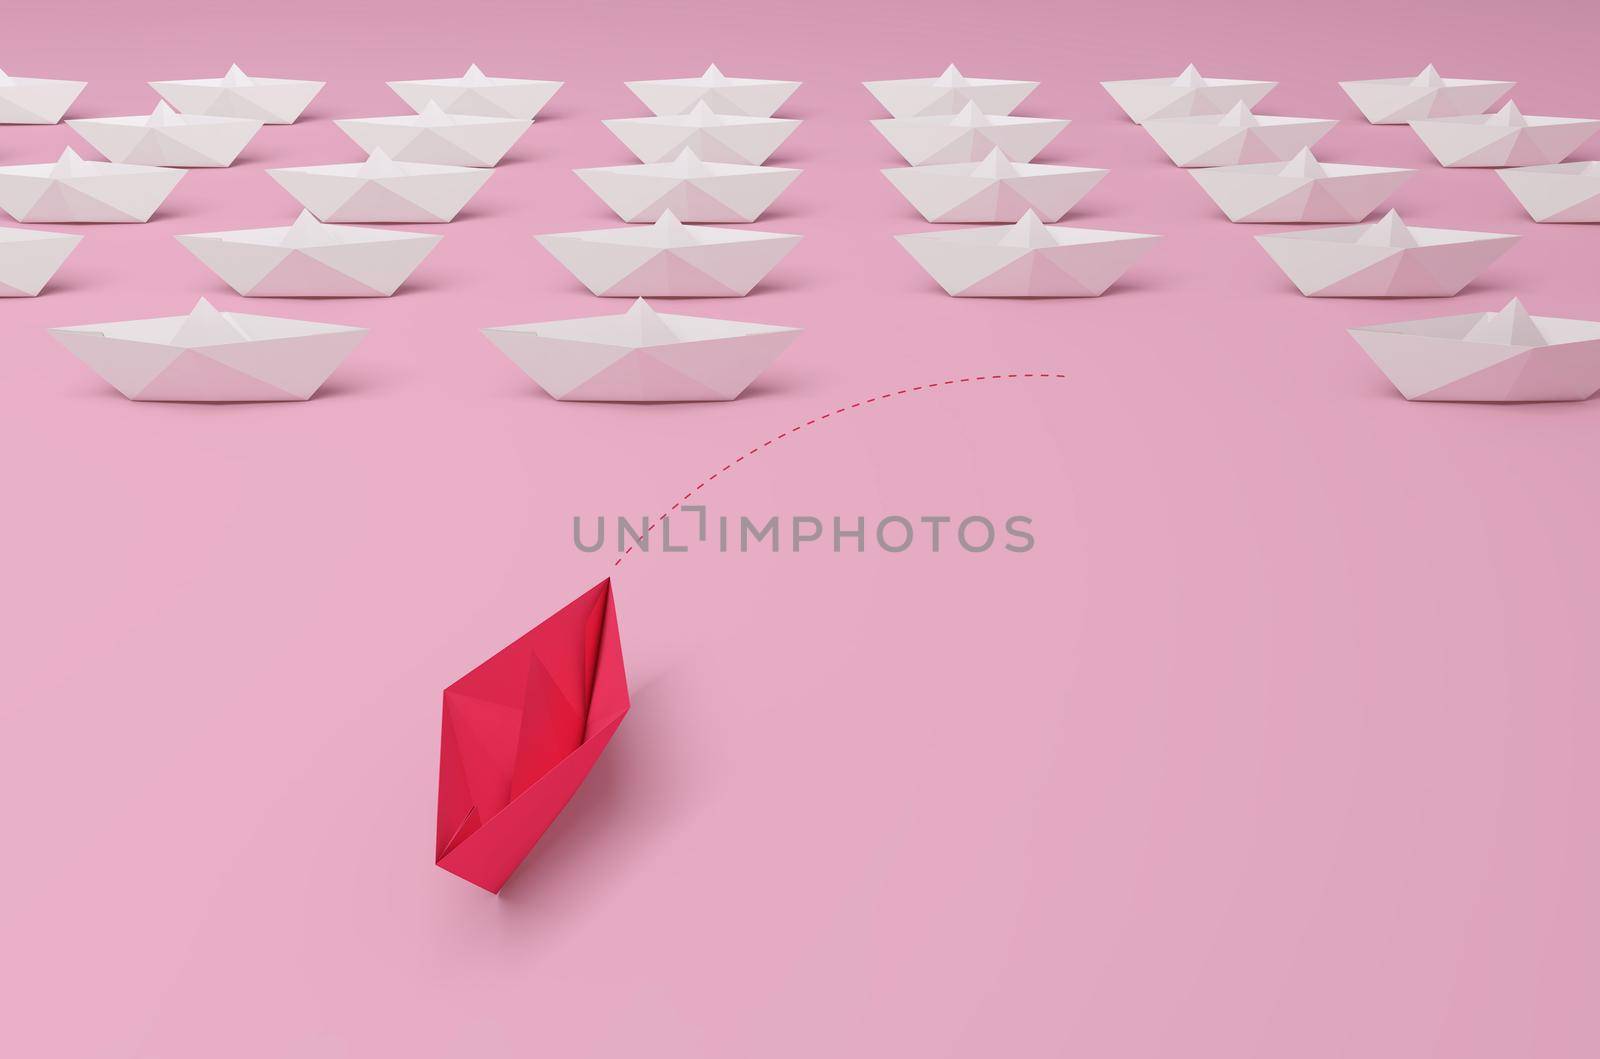 Women's leadership concept. Pink paper ship in the foreground leading among white on pink background. 3d rendering.